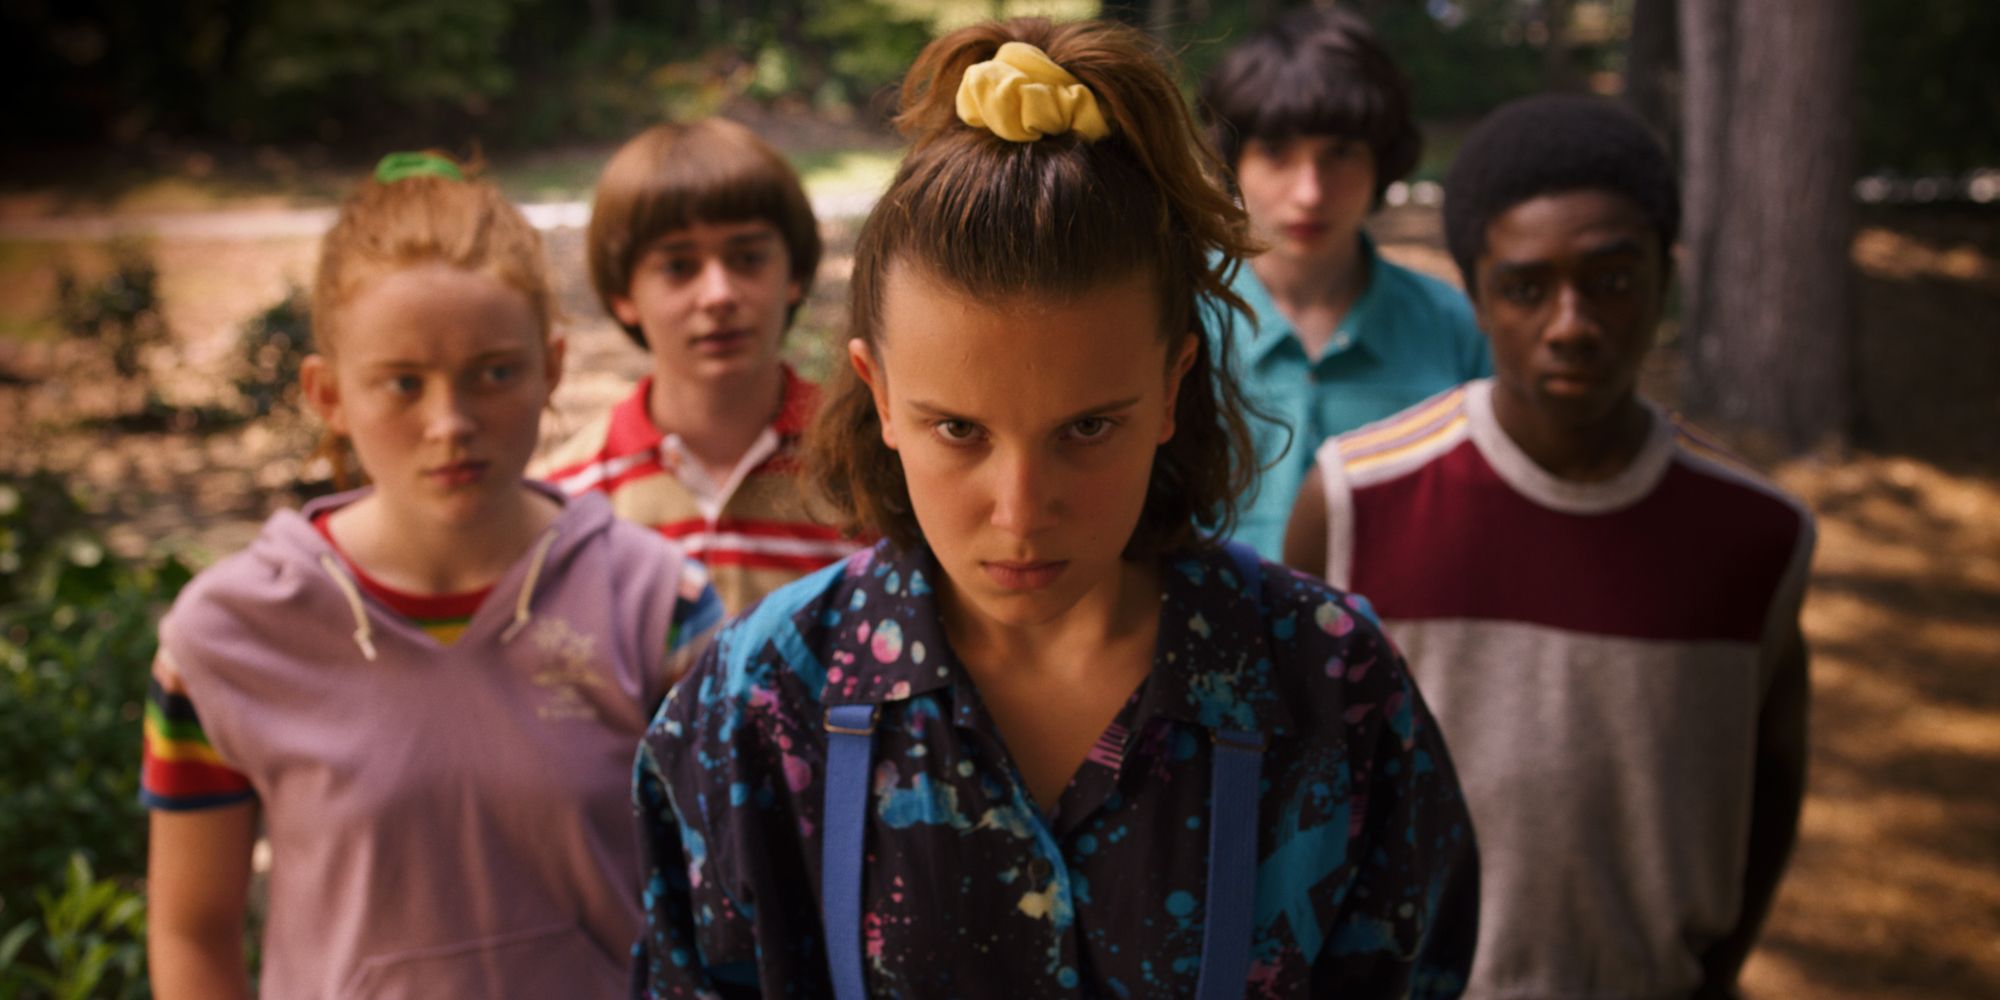 Stranger Things Season 3’s Big Problem Is That It’s Scared Of Change